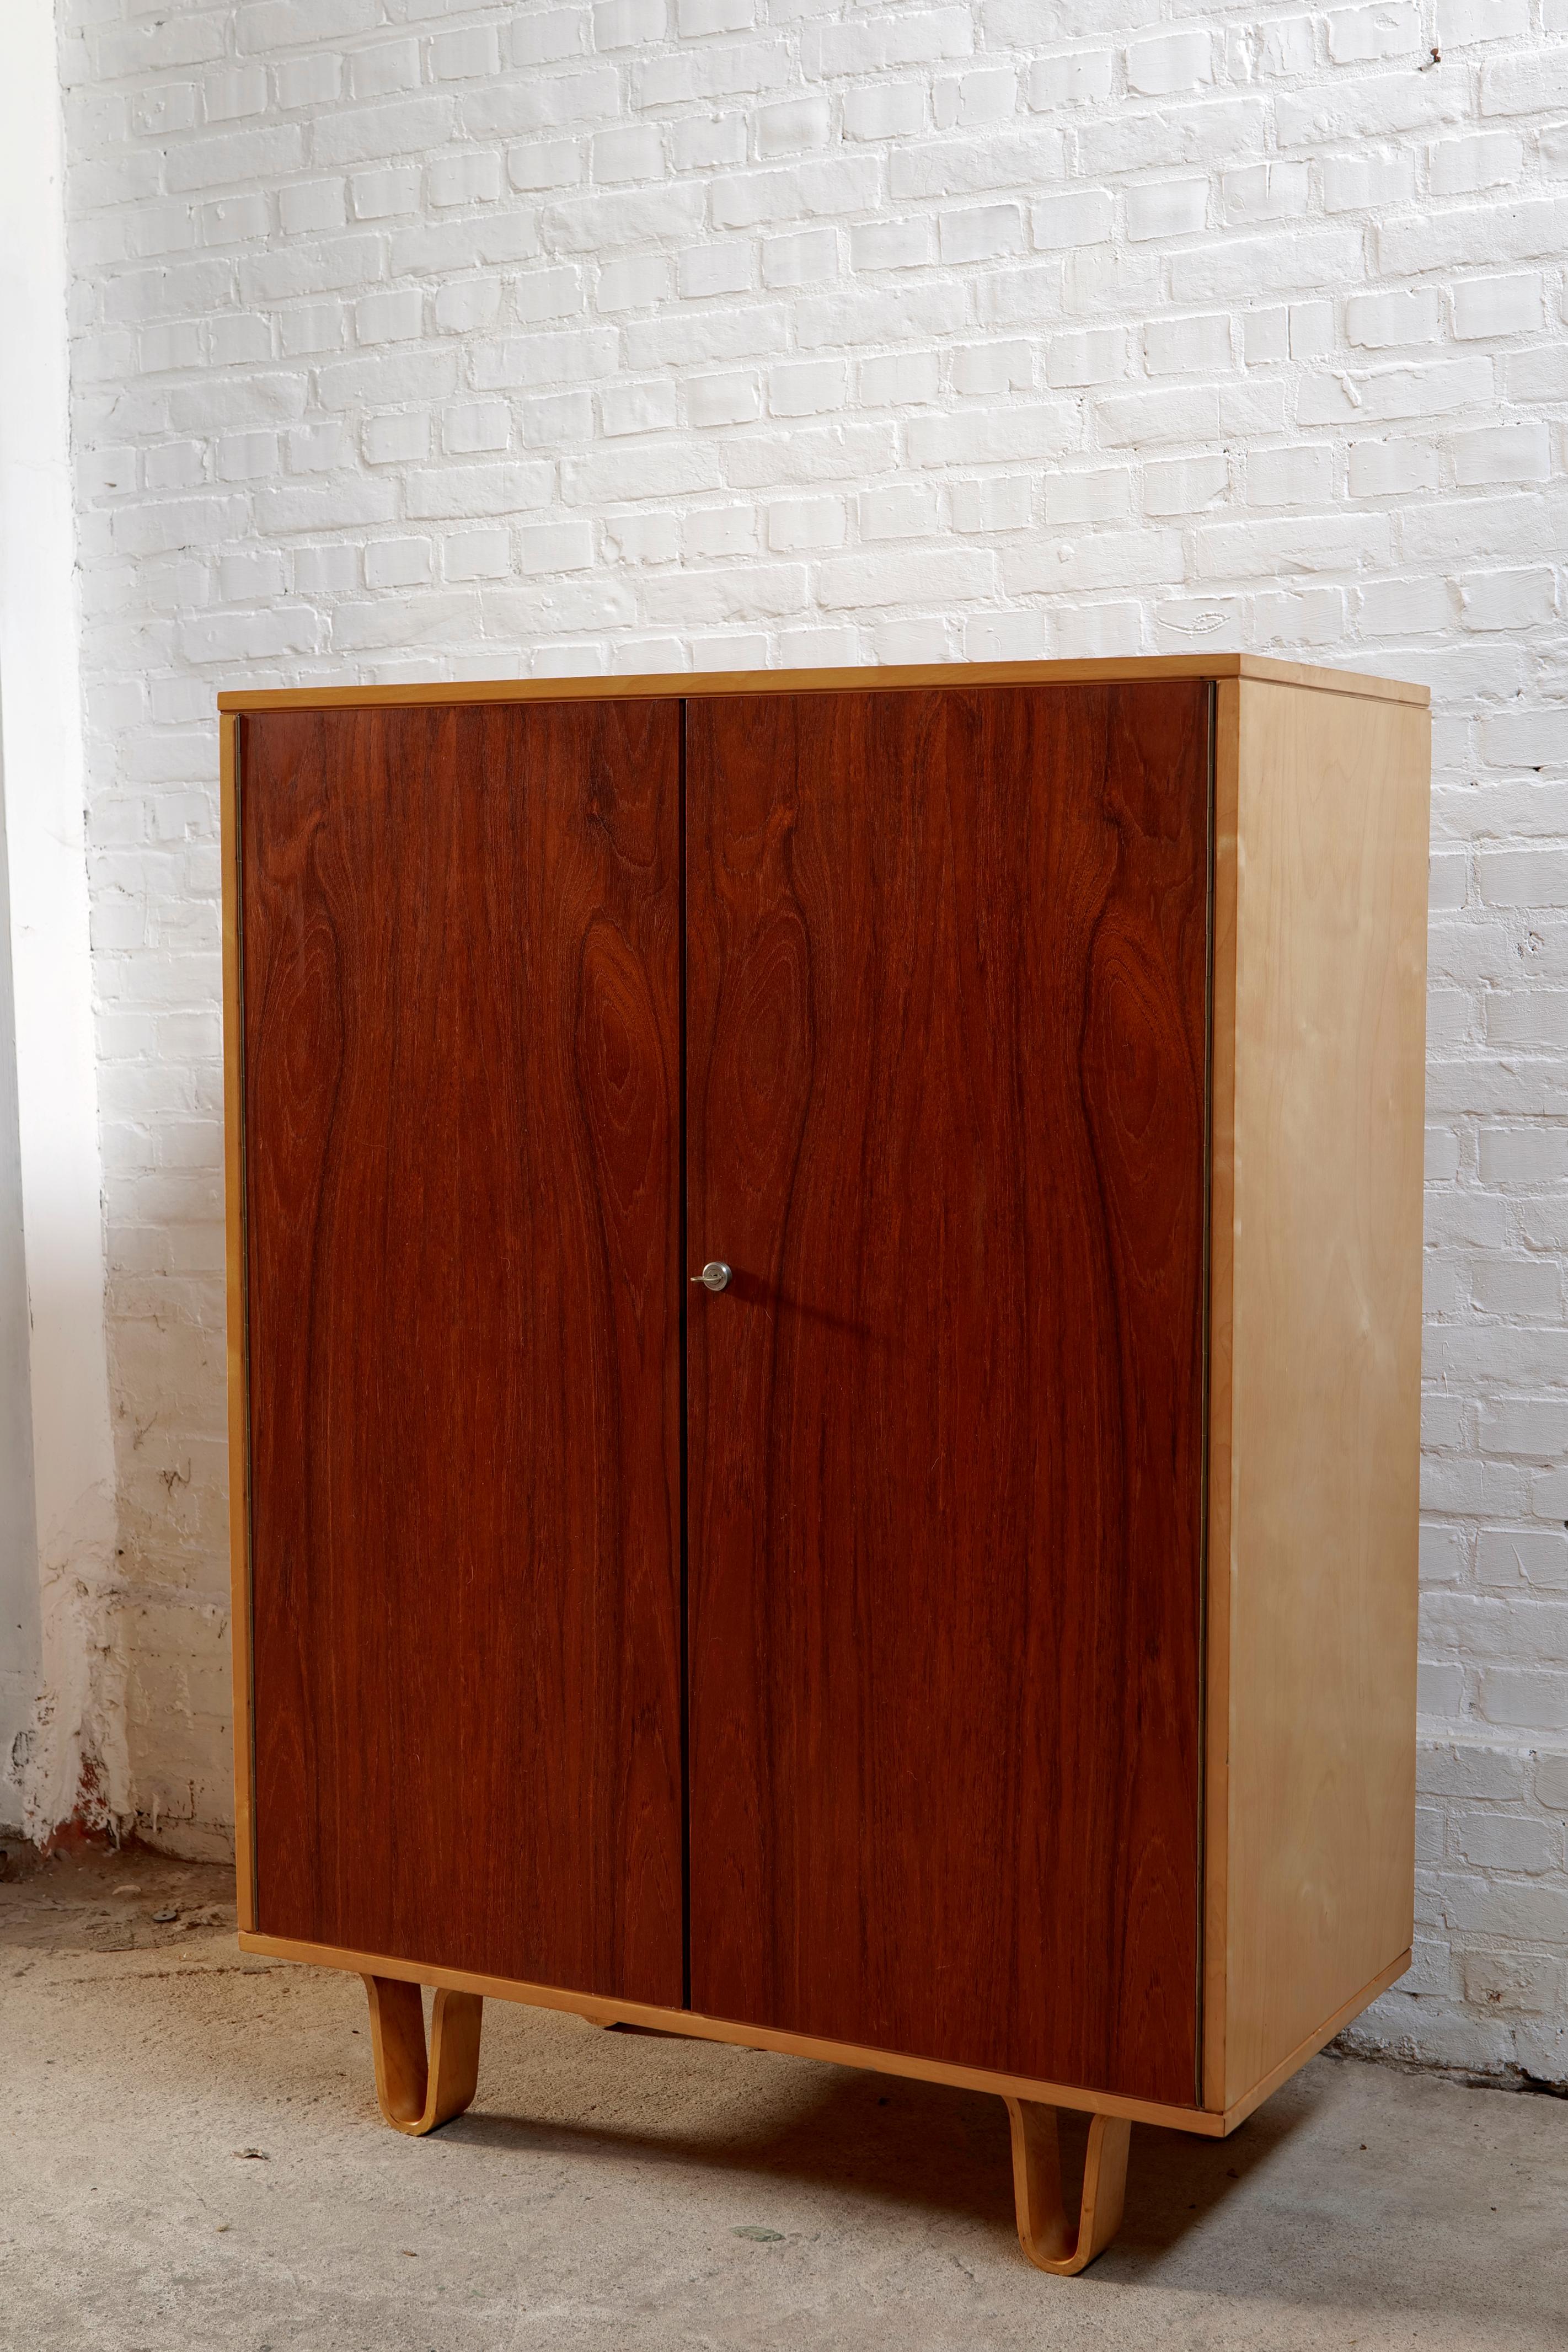 A Mid-Century linnen cabinet 'model CB06', designed by Cees Braakman in the 1950s and manufactured by Pastoe in the Netherlands. 

This is a rare example in the birchwood series with more exclusive teak doors combined with a birch cabinet. 

Behind